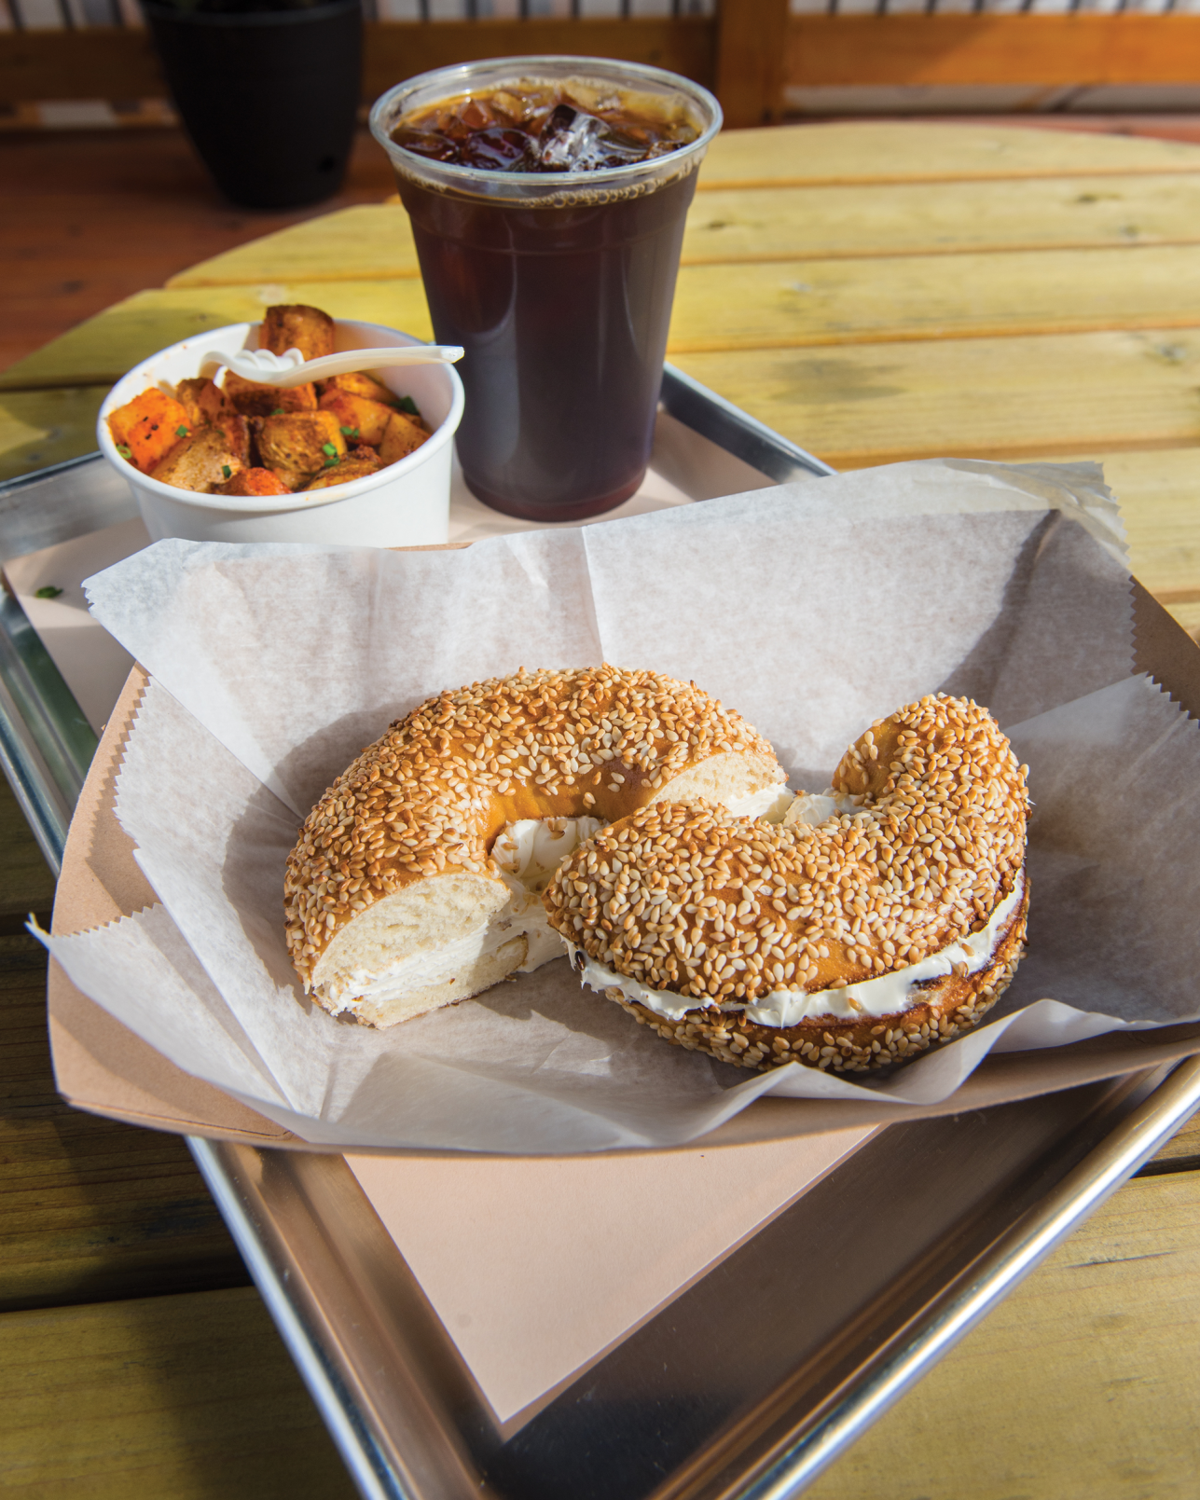 Cheap Eats: Bare Naked Bagel — Bagel With Cream Cheese and Side of Skillet Potatoes — $6.75